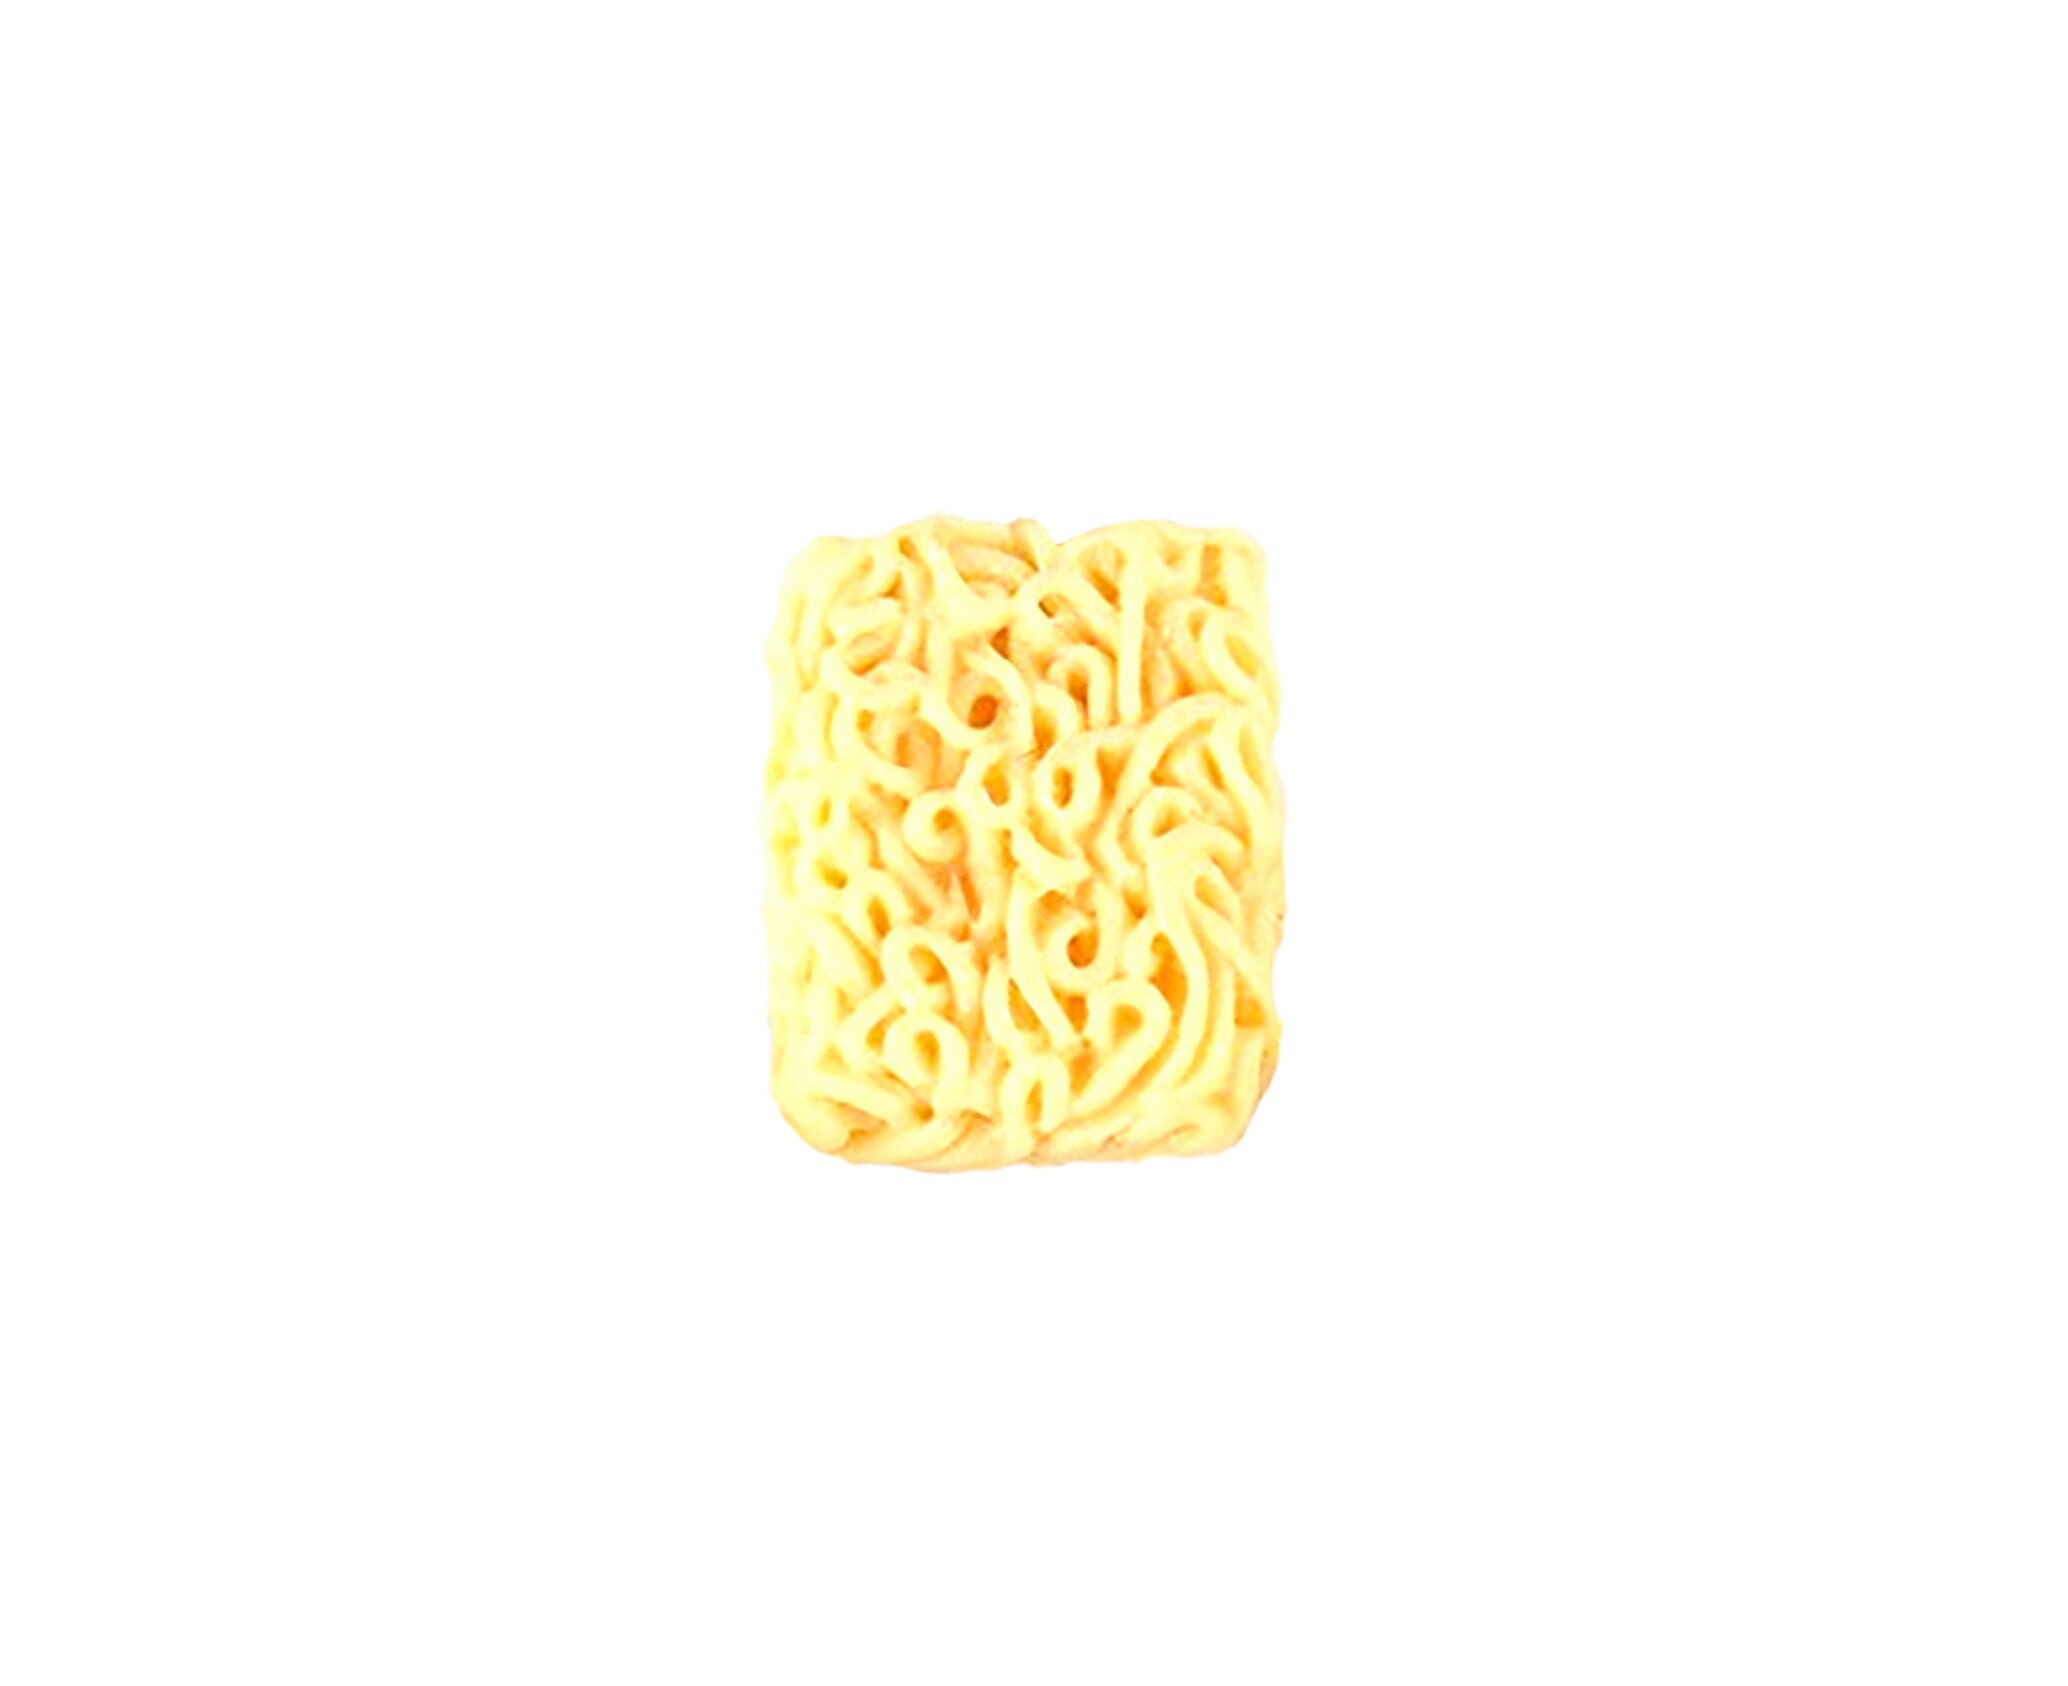 Mini Ramen Pin Japanese Dried Noodle Instant Soup Resin